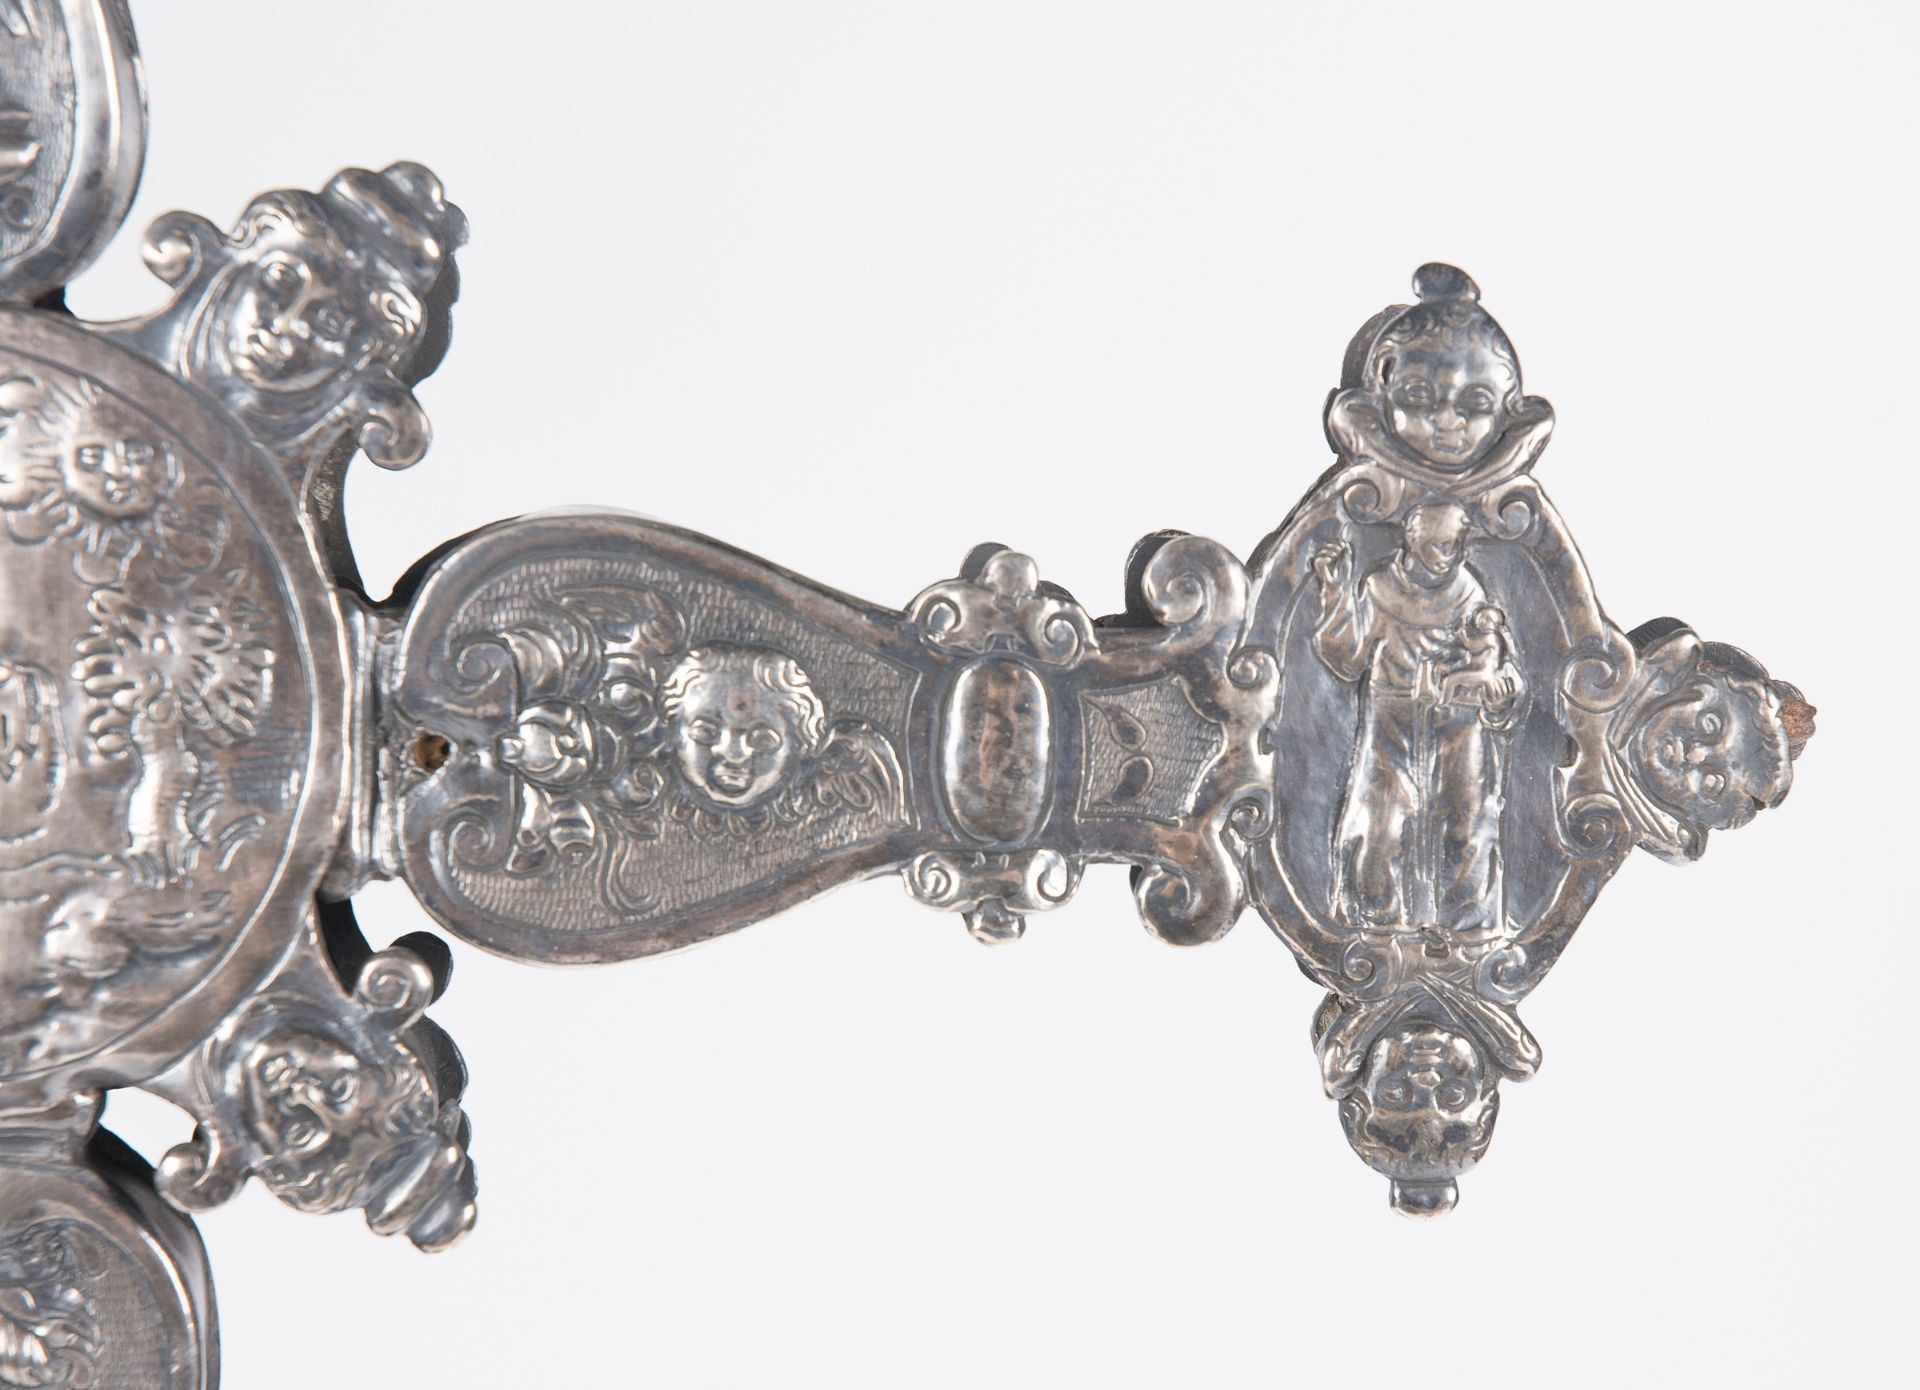 Large, chased silver processional cross. 16th century. - Image 10 of 14